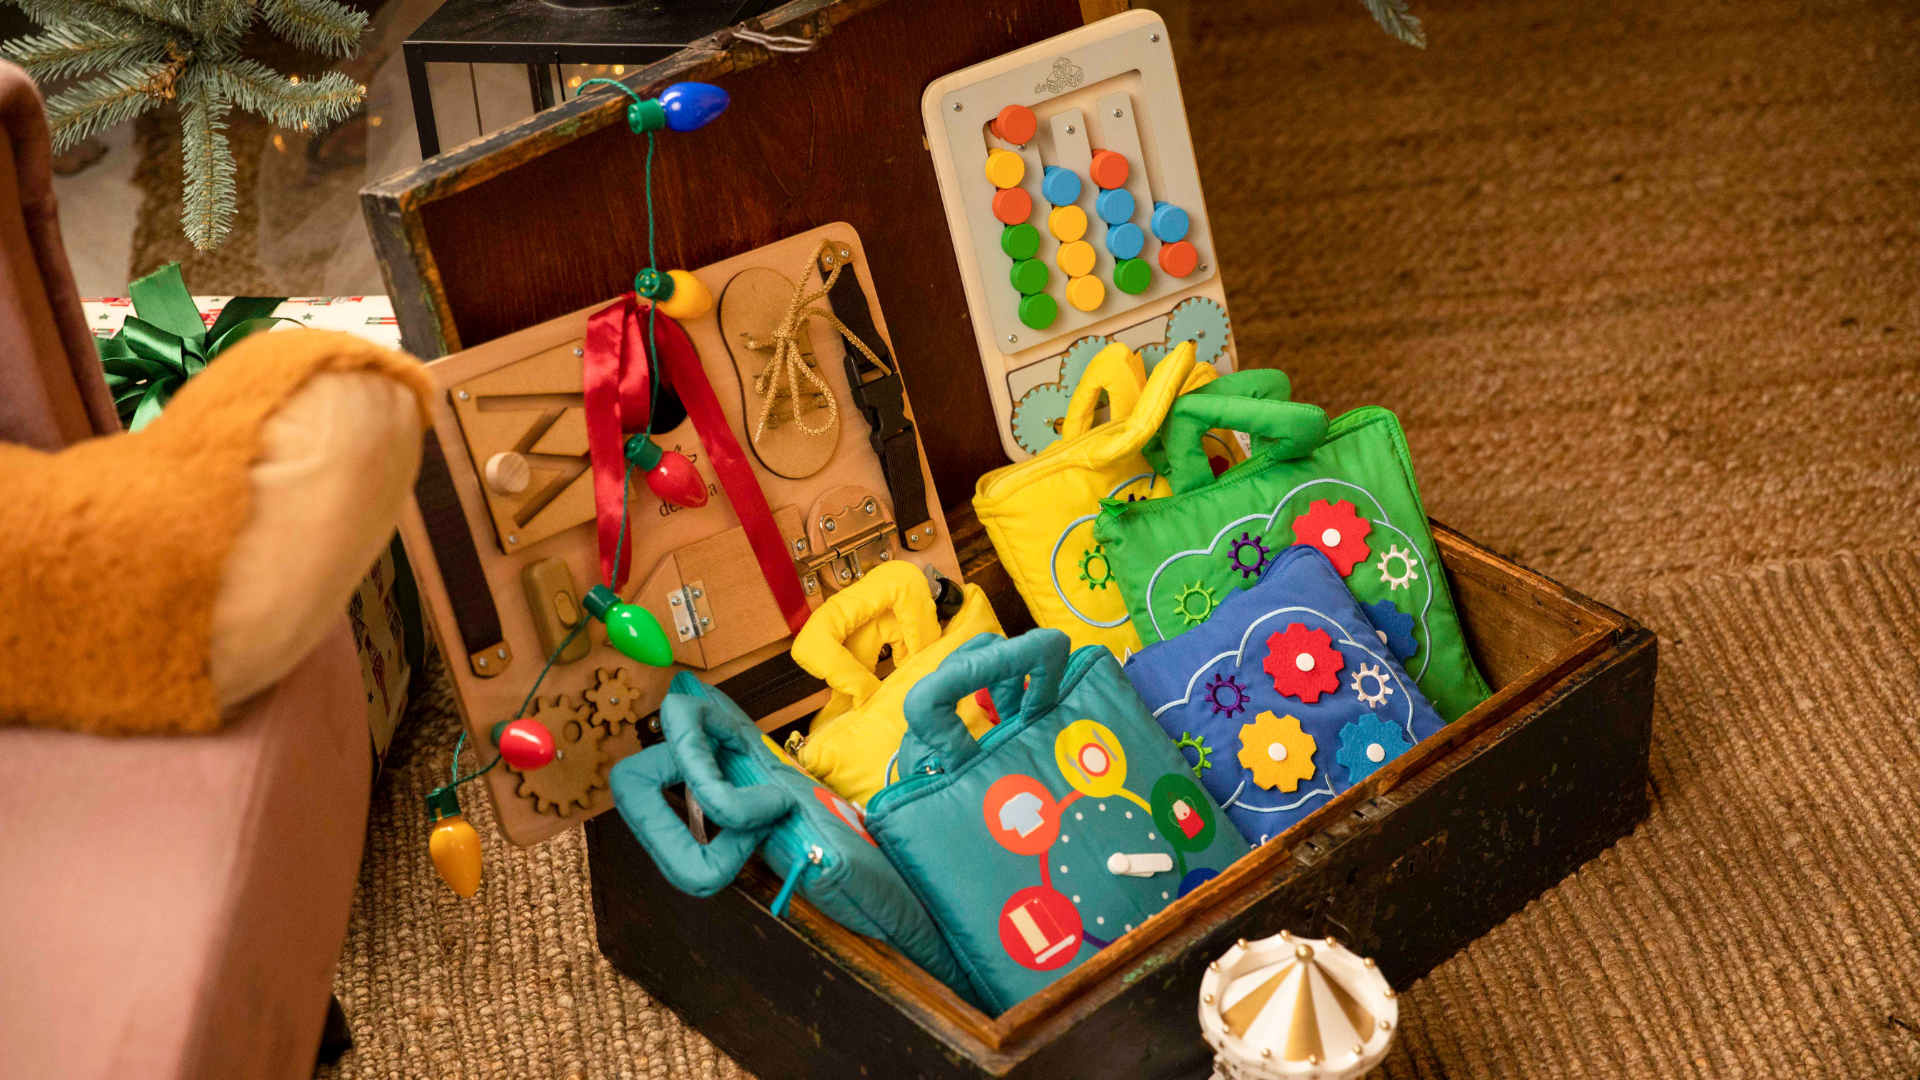 Make the most of Playtime! Age-appropriate toys from a Montessori point of view